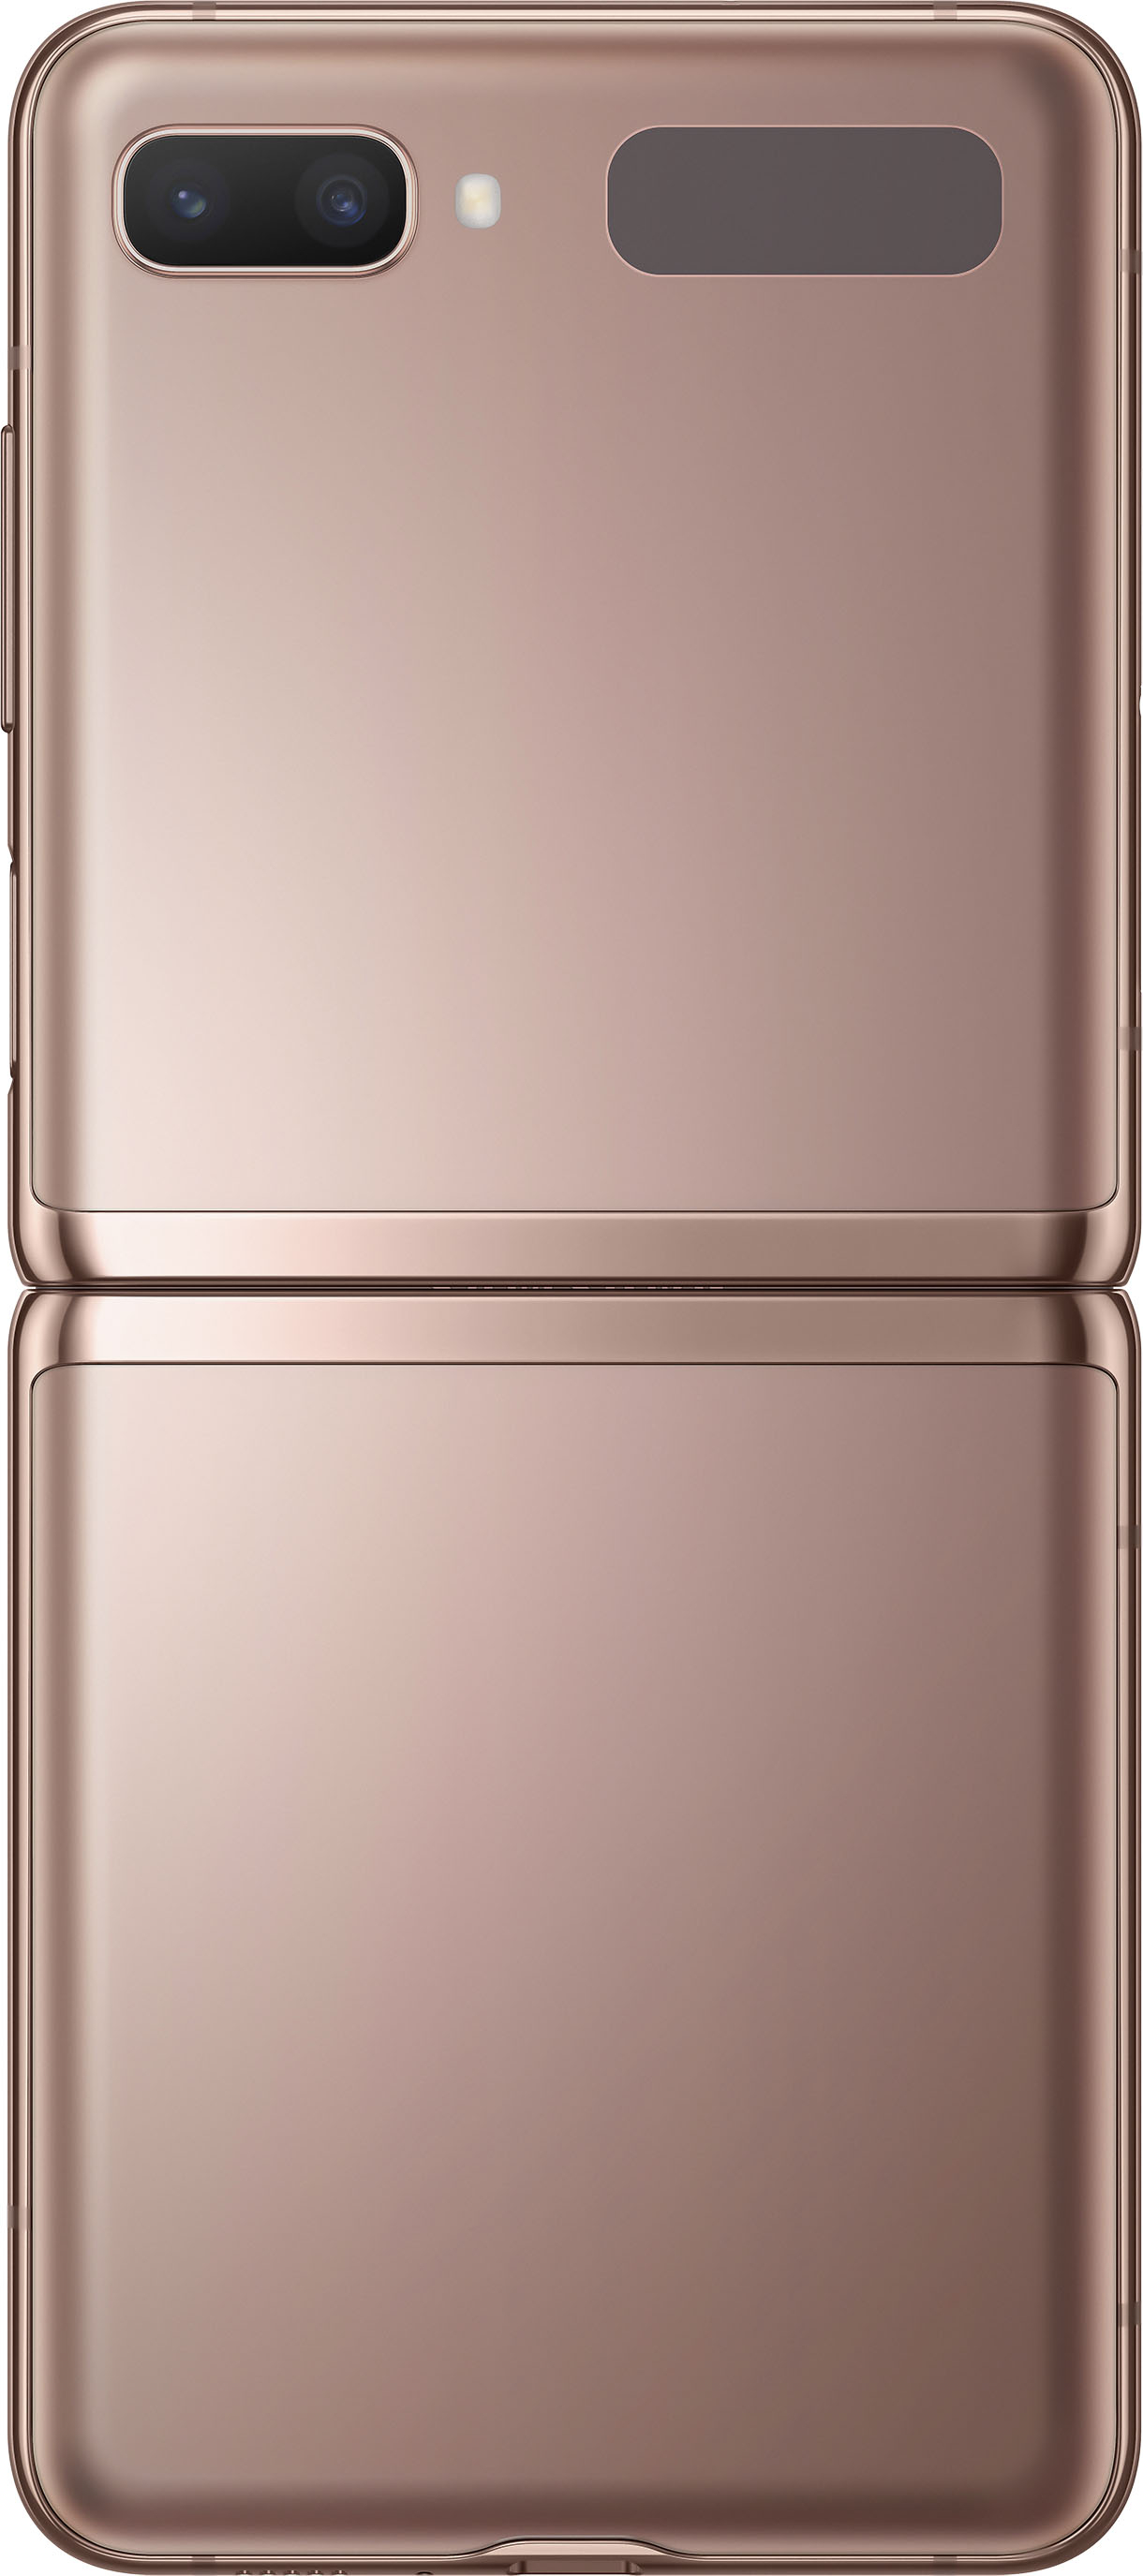 Back View: SaharaCase - Hard Shell Silicone Case for Samsung Galaxy Z Flip3 5G - Rose Gold